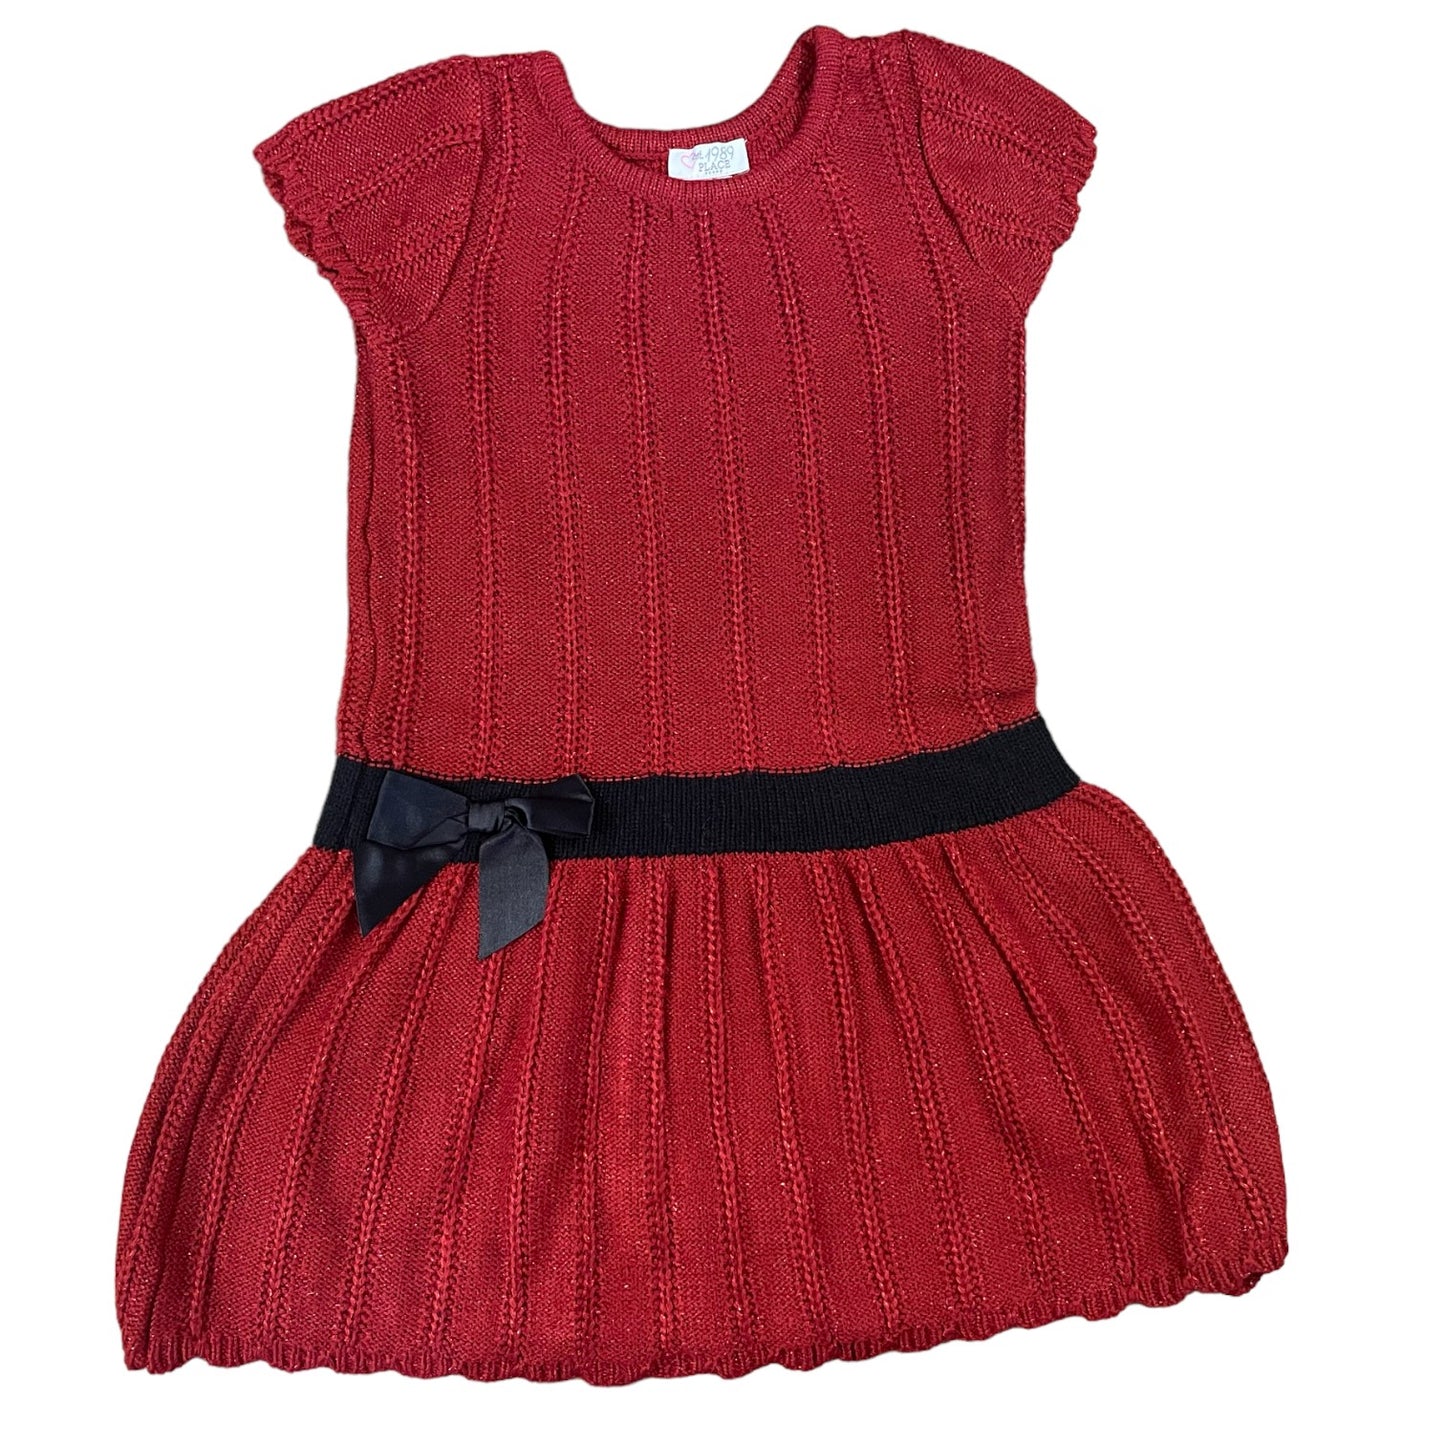 Children's Place Girls Dress Red Size 4T